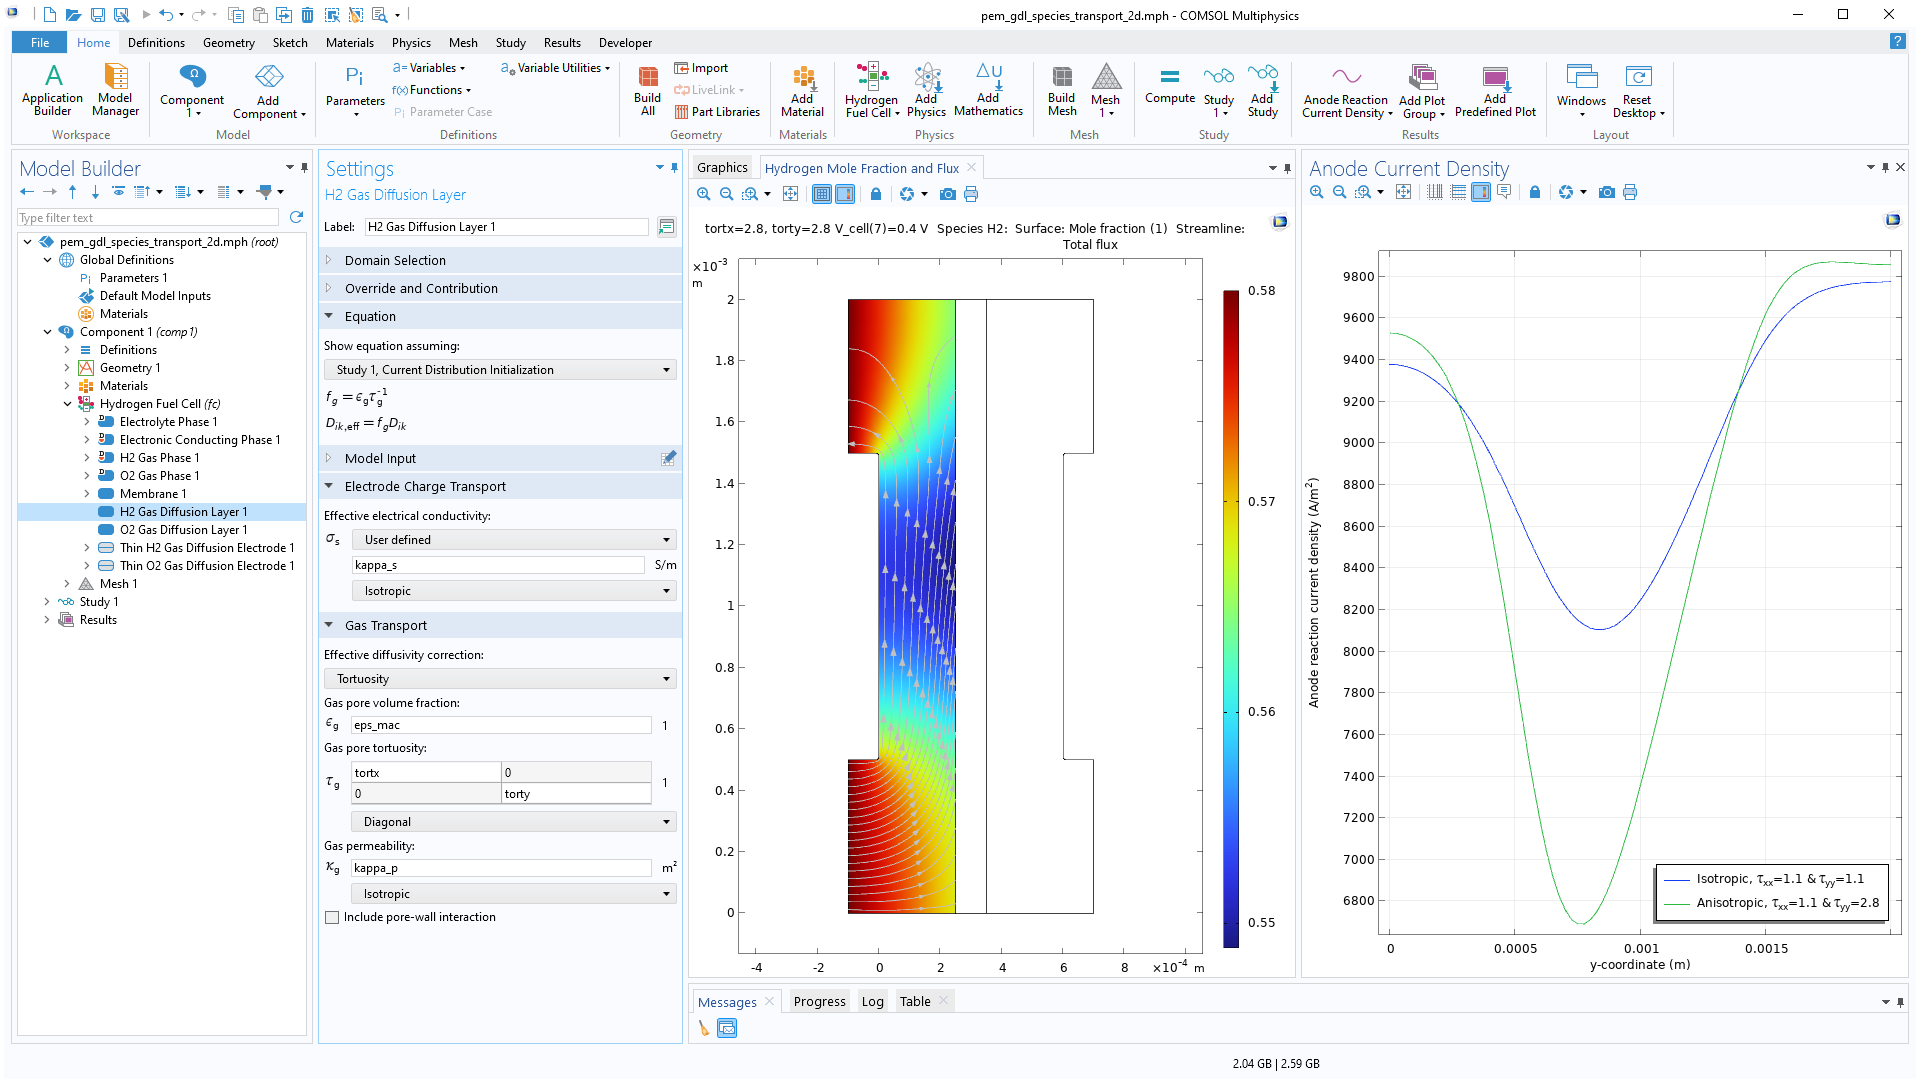 The COMSOL Multiphysics UI showing the Model Builder with the H2 Gas Diffusion Layer node highlighted, the corresponding Settings window, and two Graphics windows.